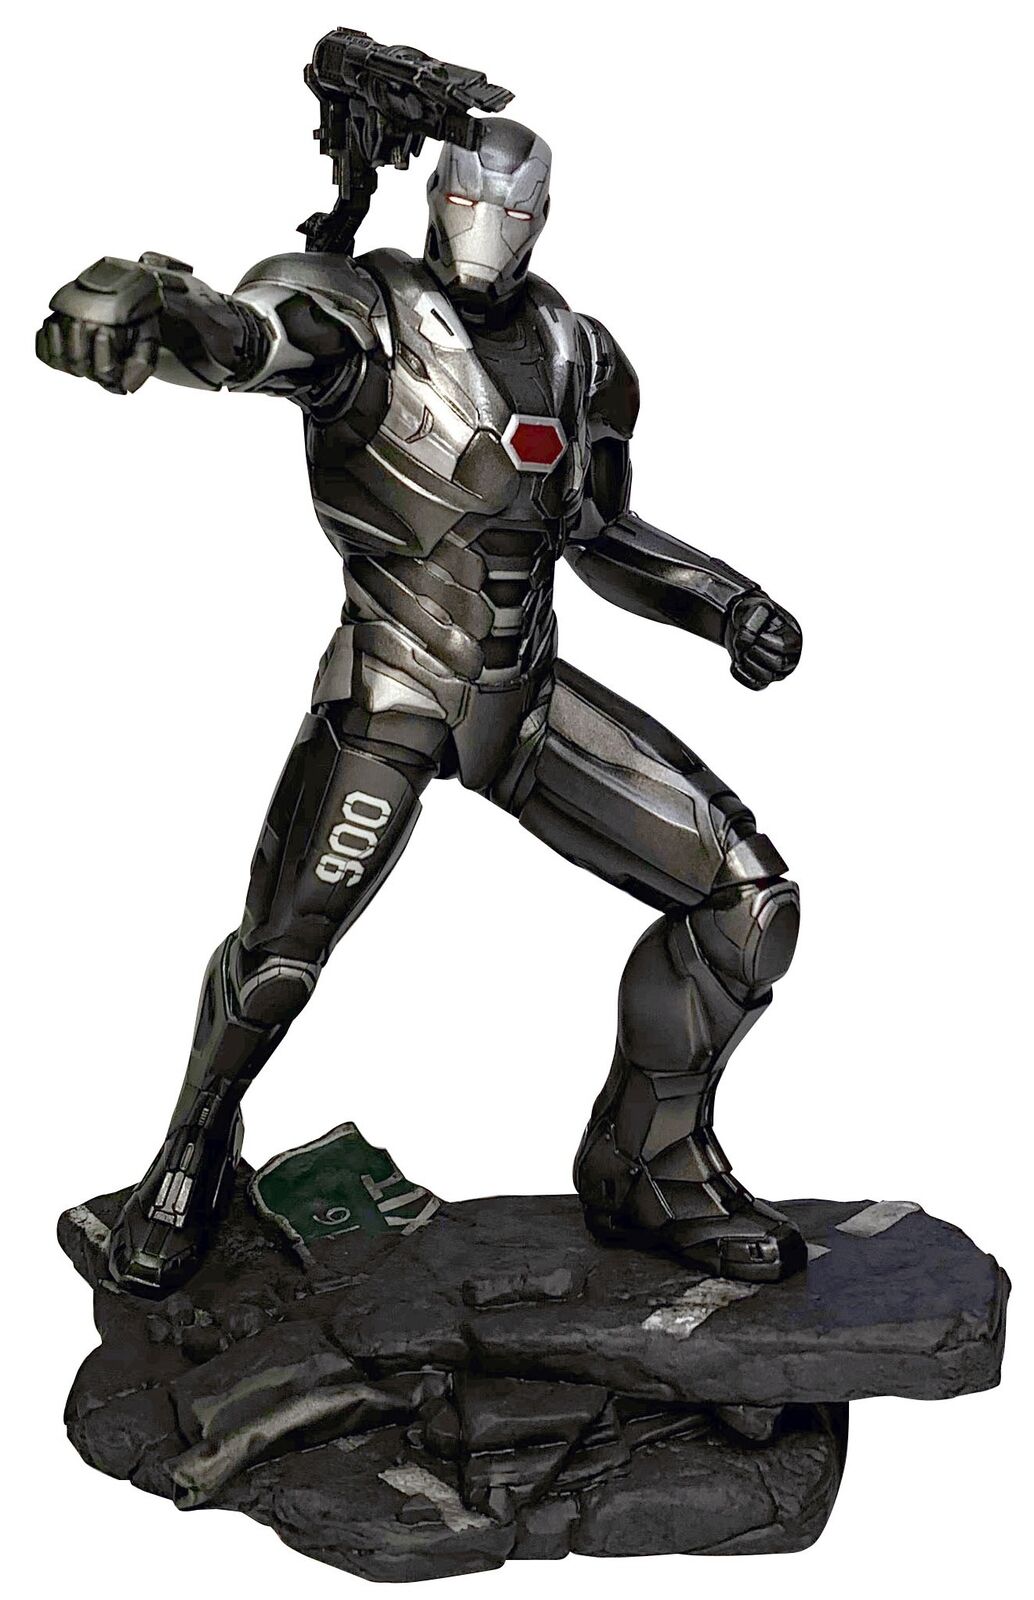 Avengers Endgame Marvel Gallery War Machine 9-Inch Collectible PVC Statue